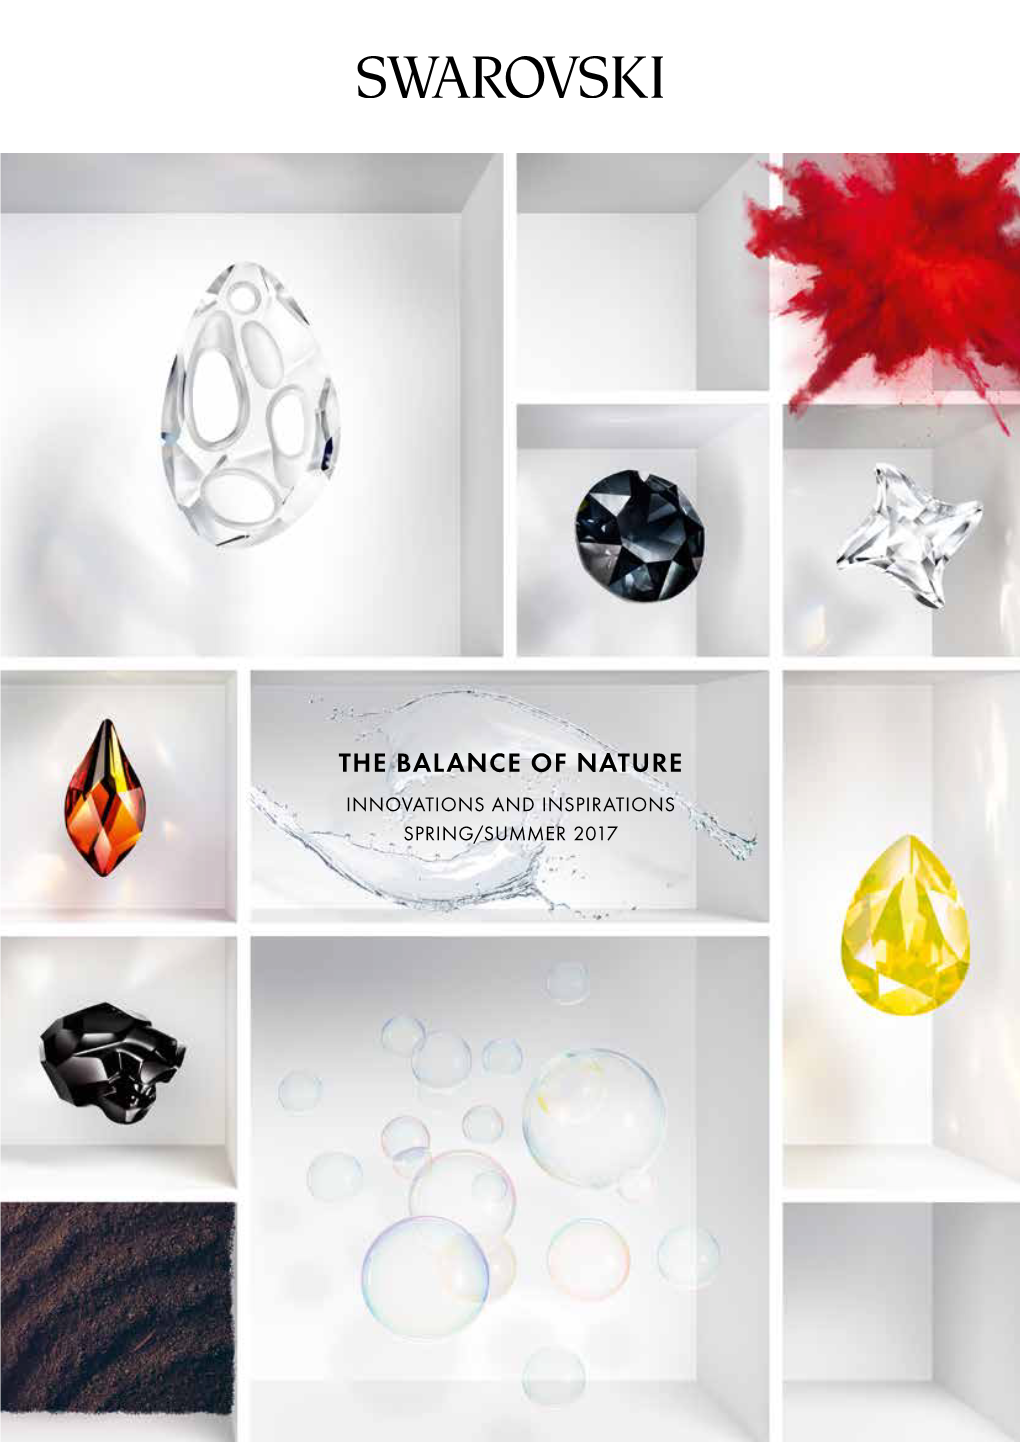 The Balance of Nature Innovations and Inspirations Spring/Summer 2017 the Balance of Nature Innovations and Inspirations Spring/Summer 2017 We Take Responsibility